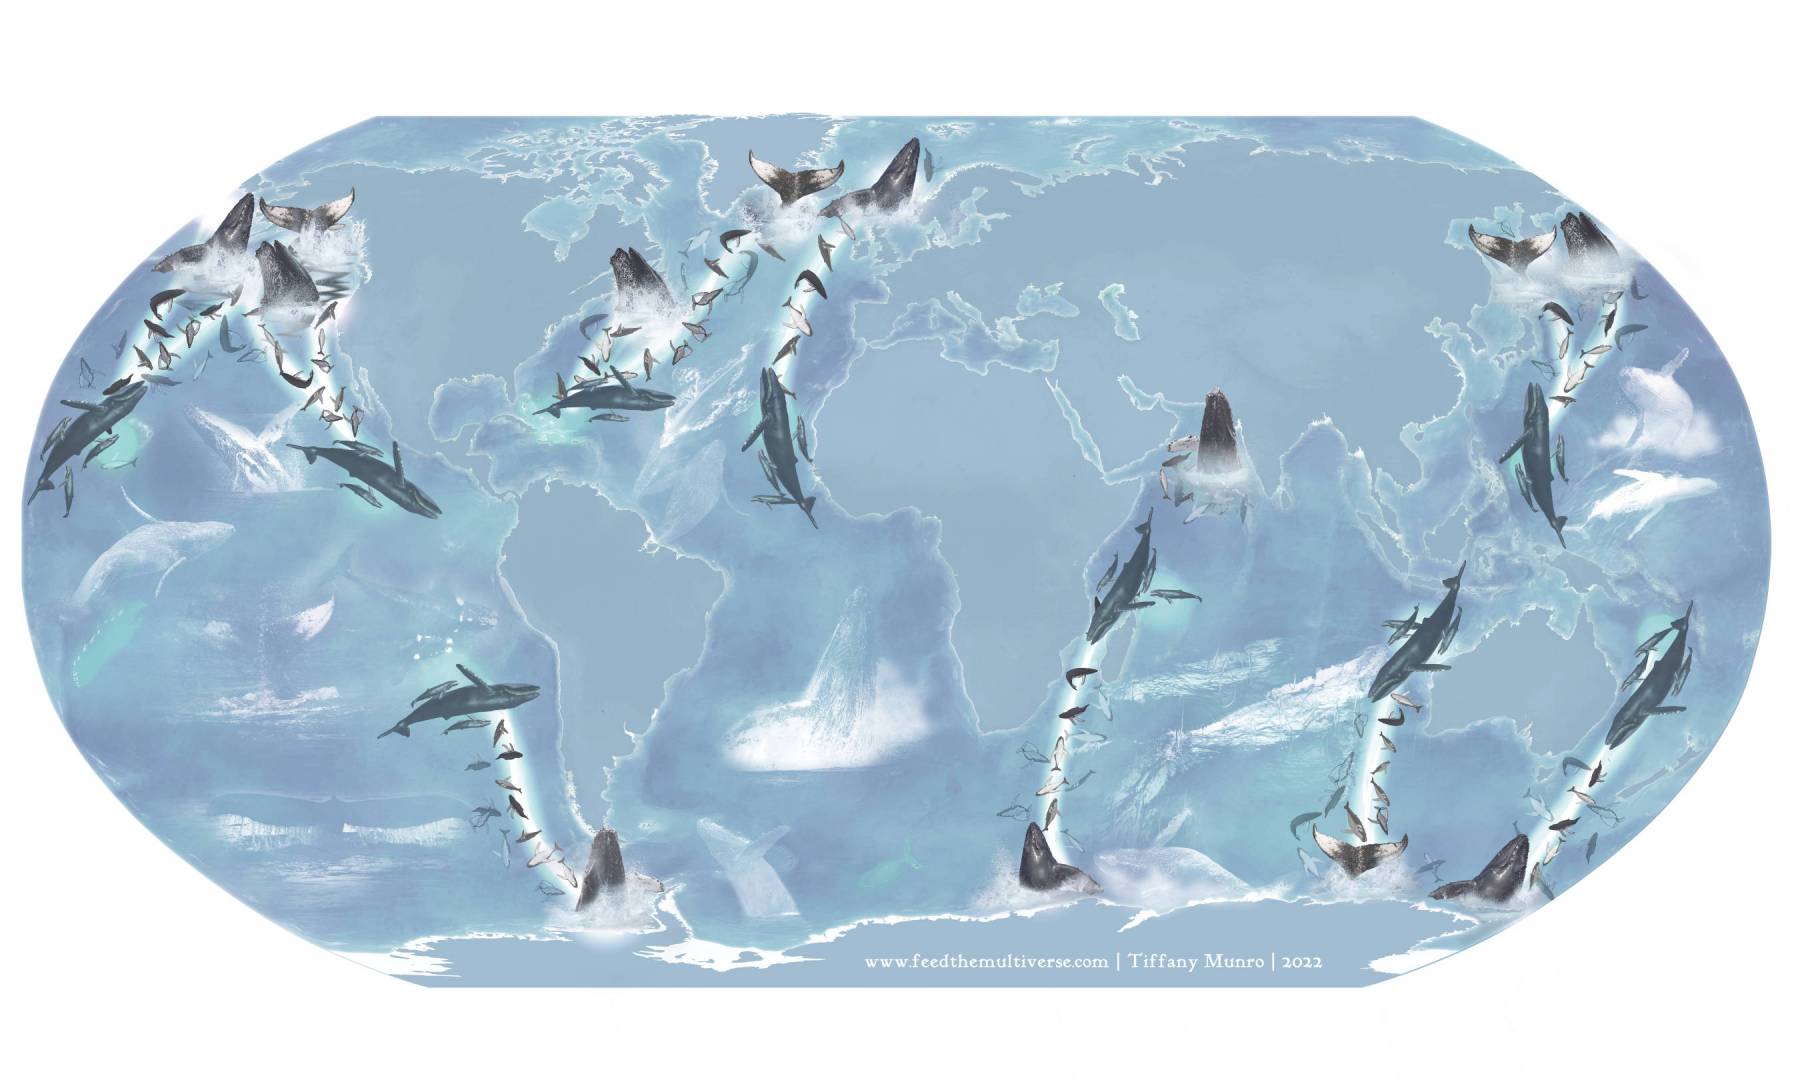 The migratory paths of Humpback whales, artistic map of the world, cartography by Tiffany Munro